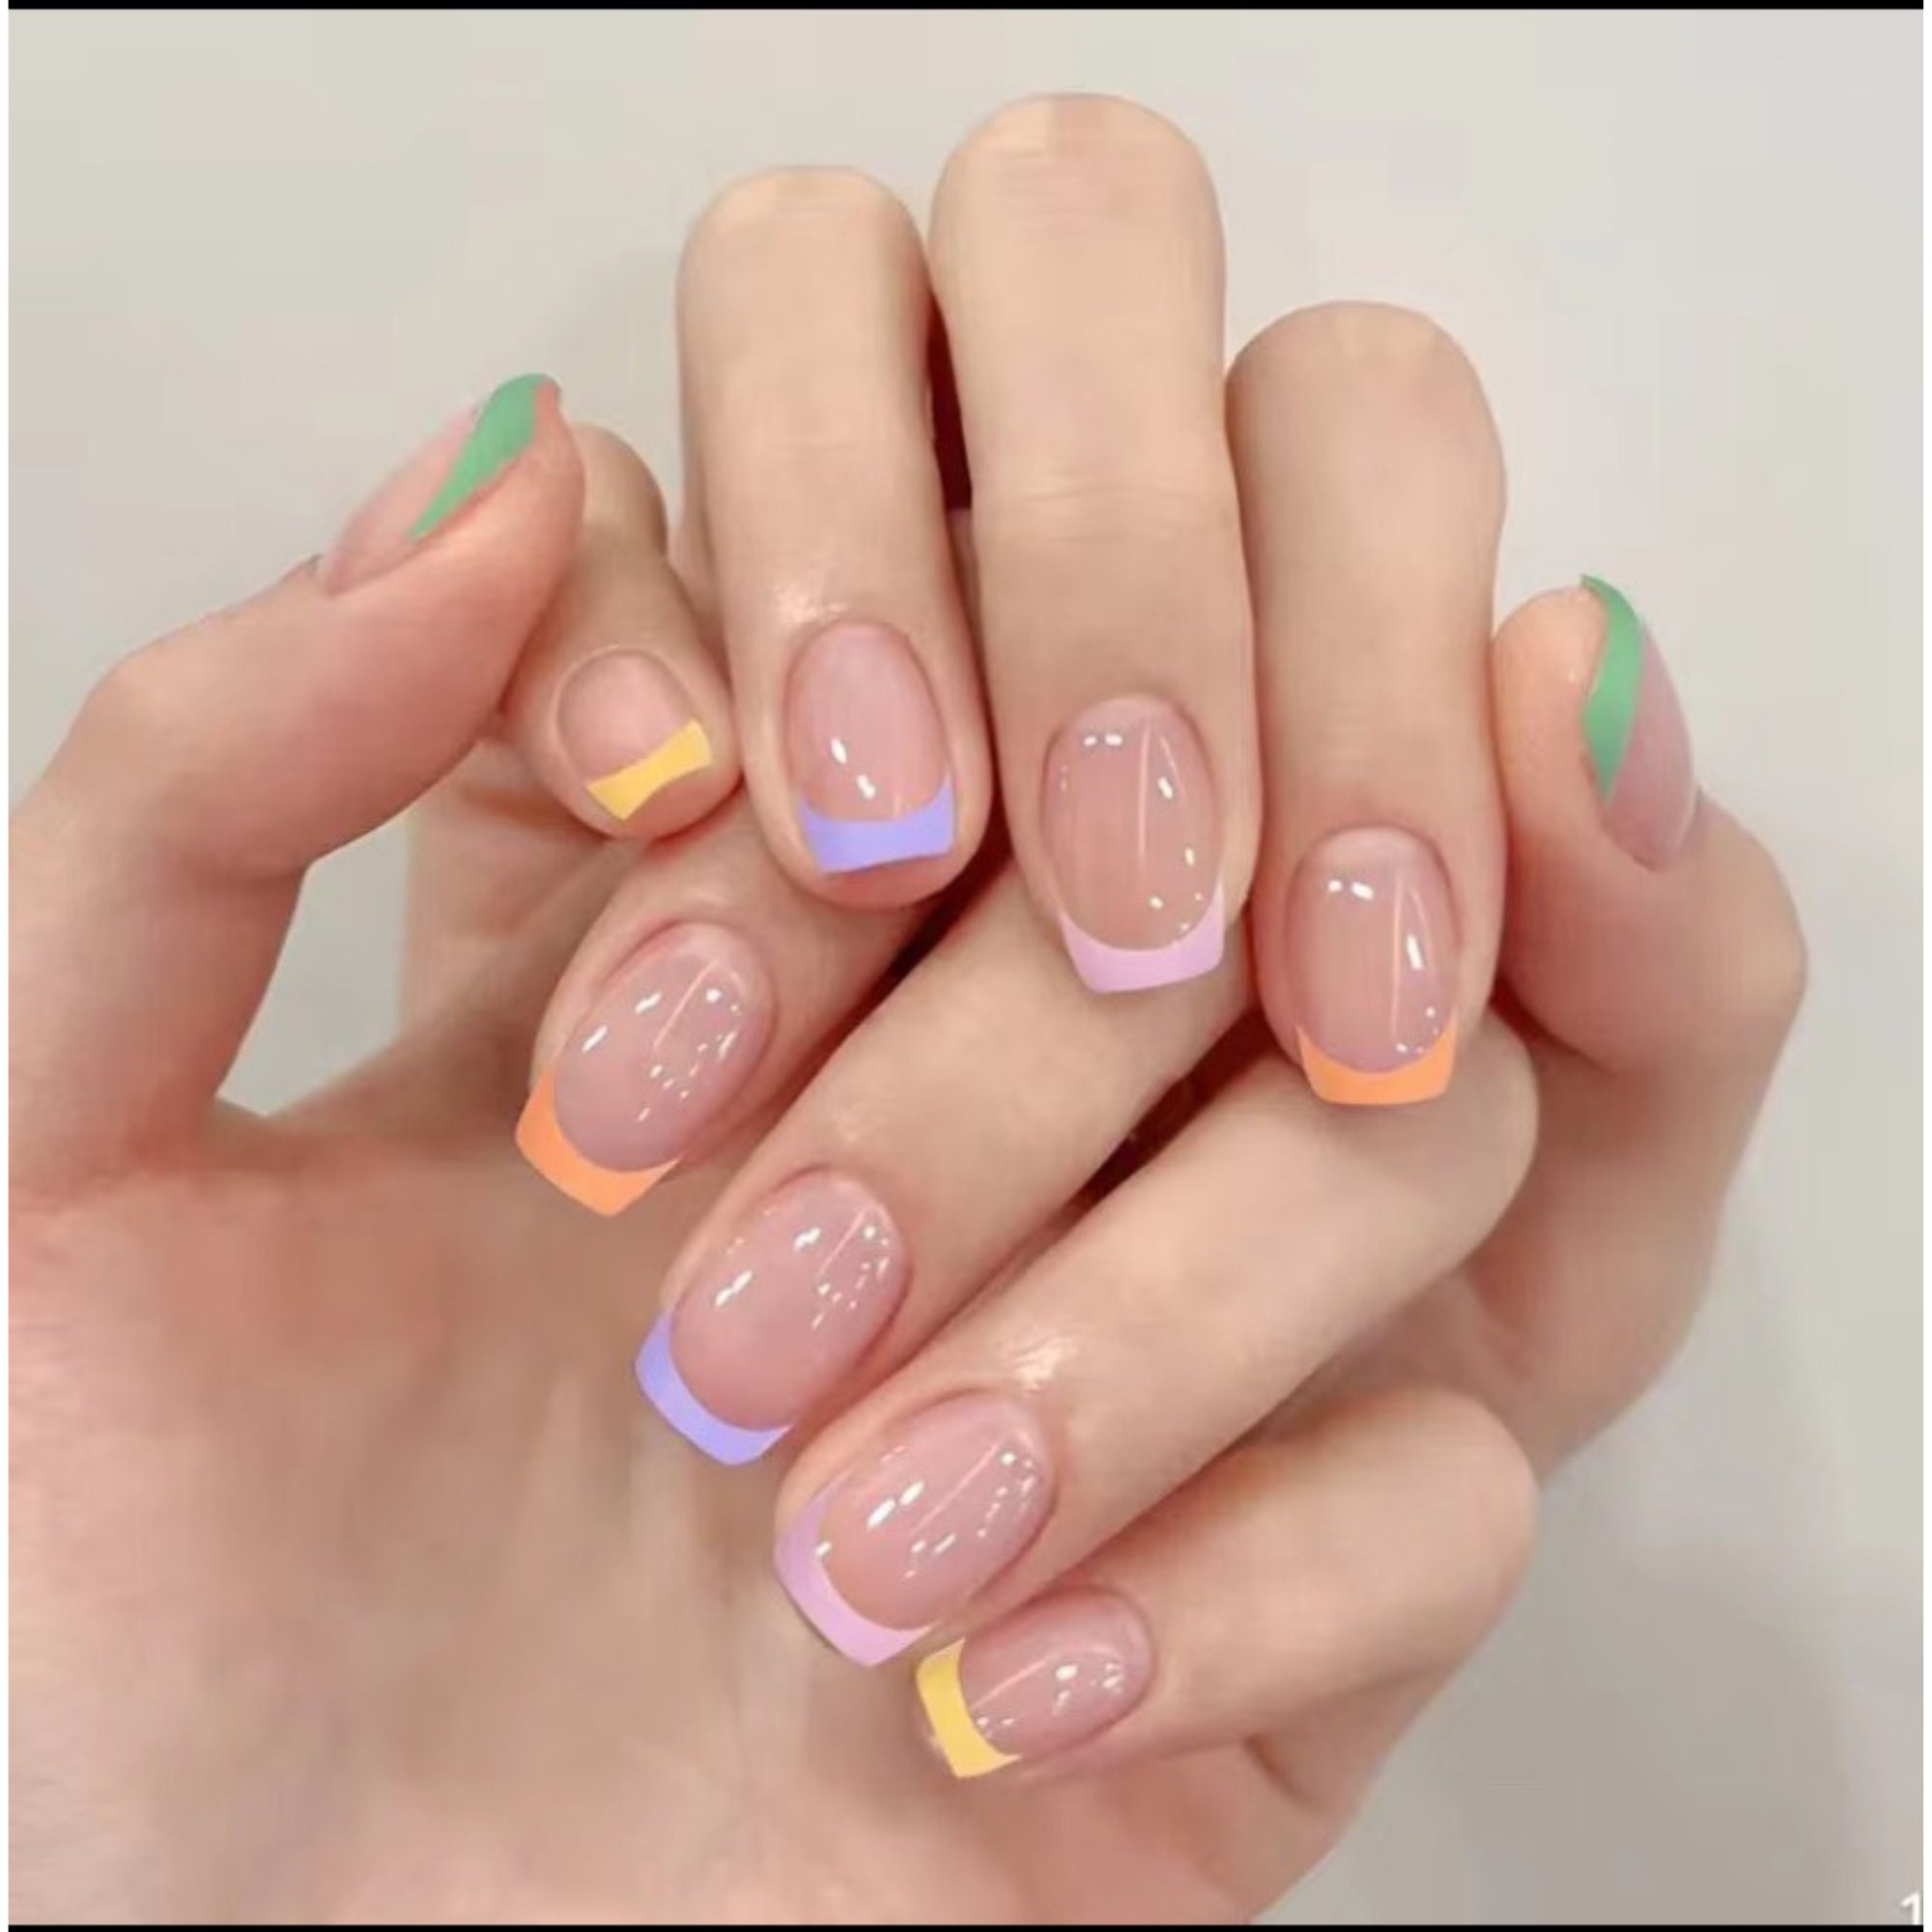 65 Cute Short Winter Nails That Will Look Just as Great on Your Hands -  Your Classy Look | Winter nails, Gel nails, Short nails